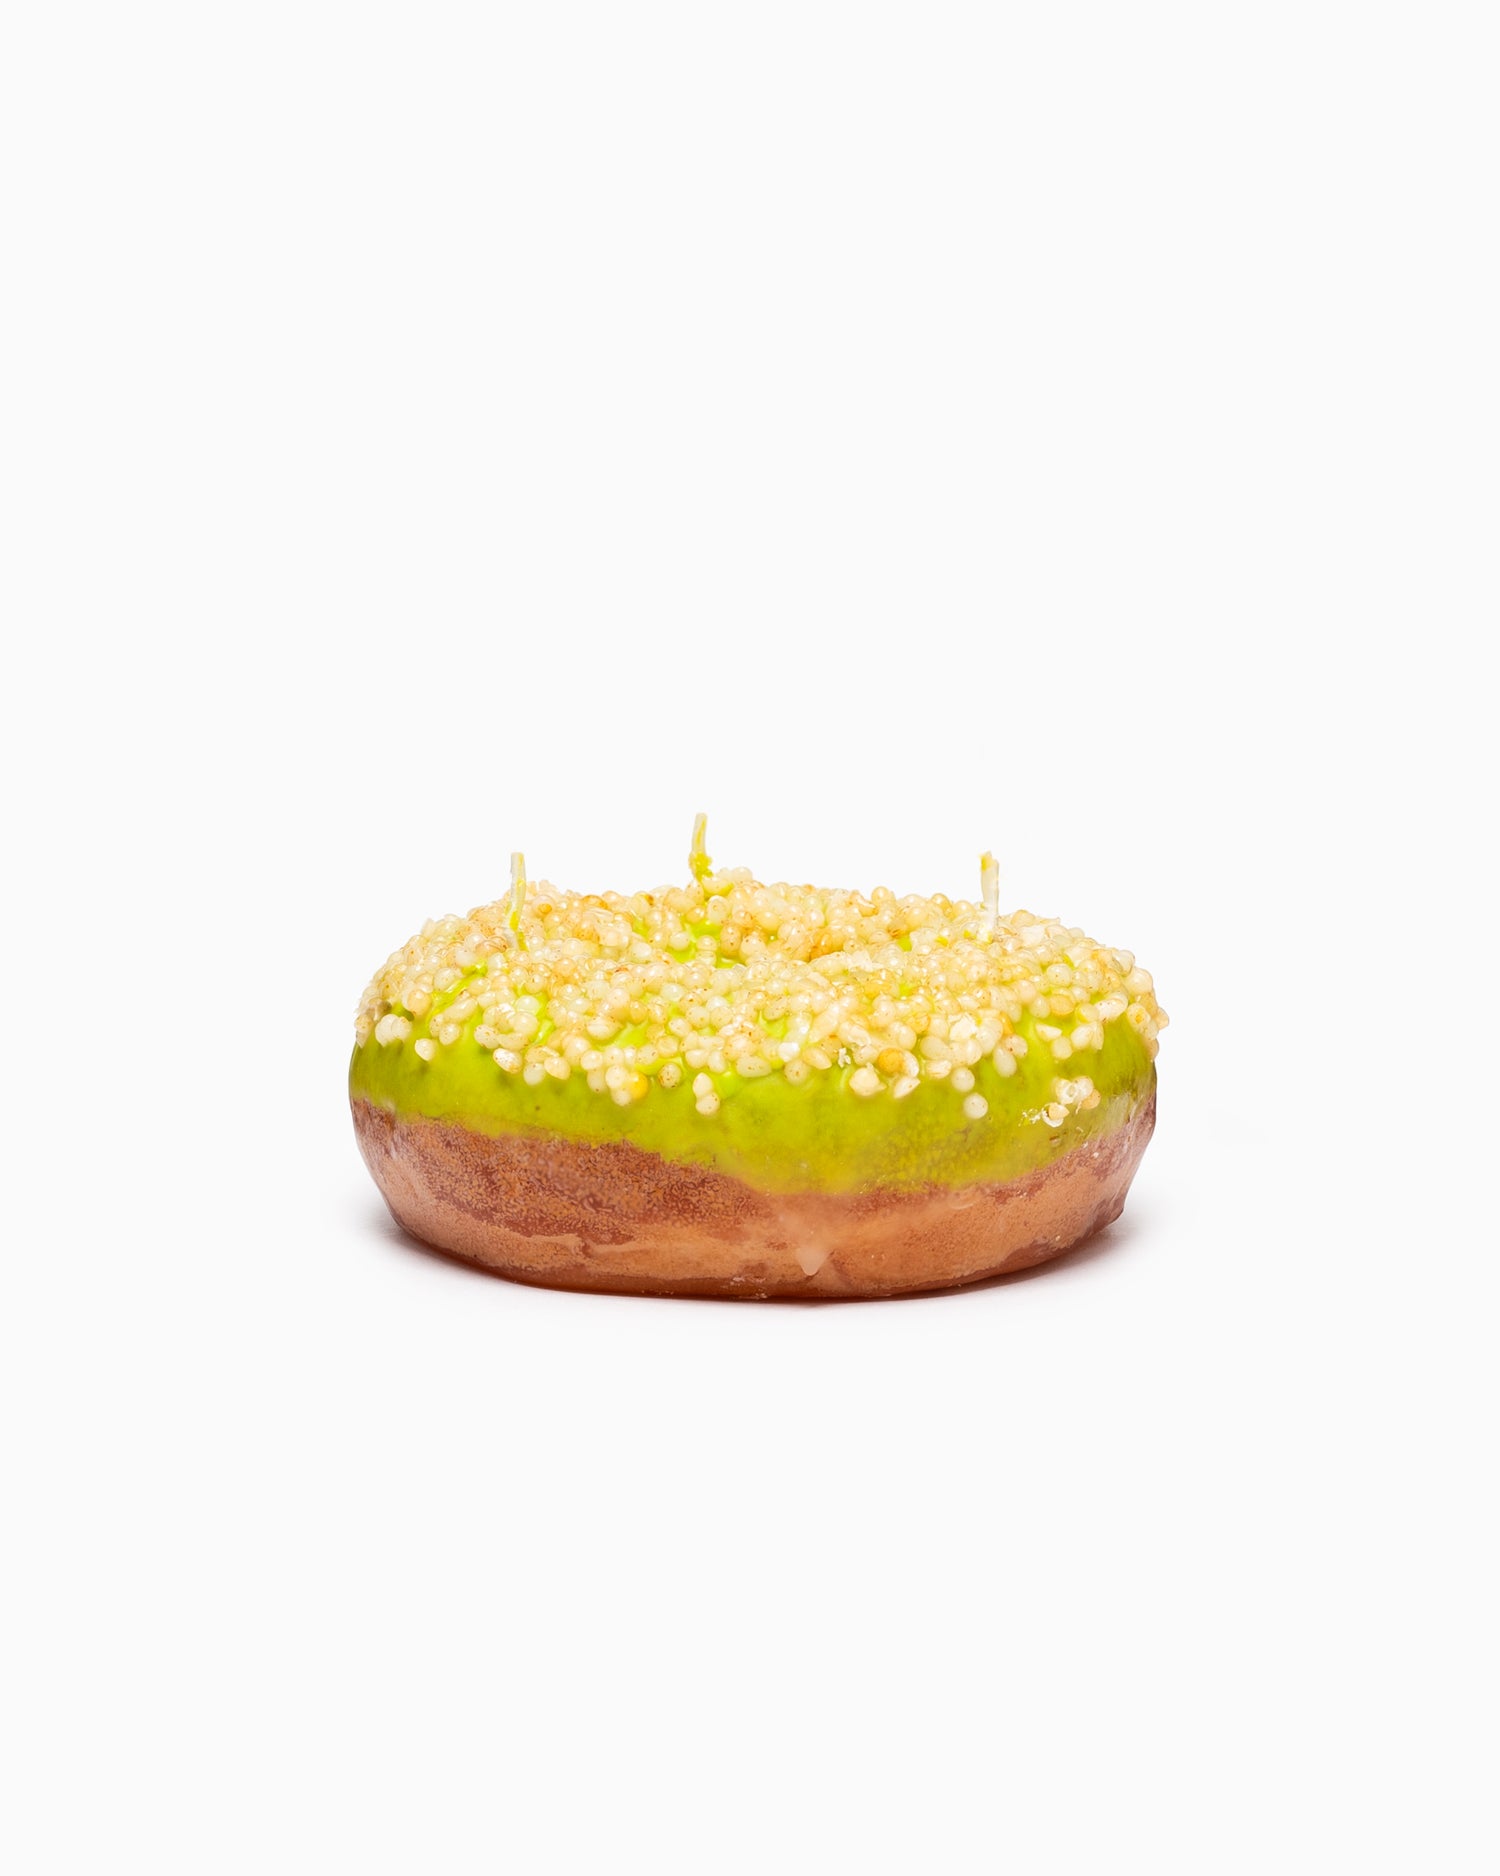 Donut Candle - Pistachio Glazed with Yellow Sprinkles